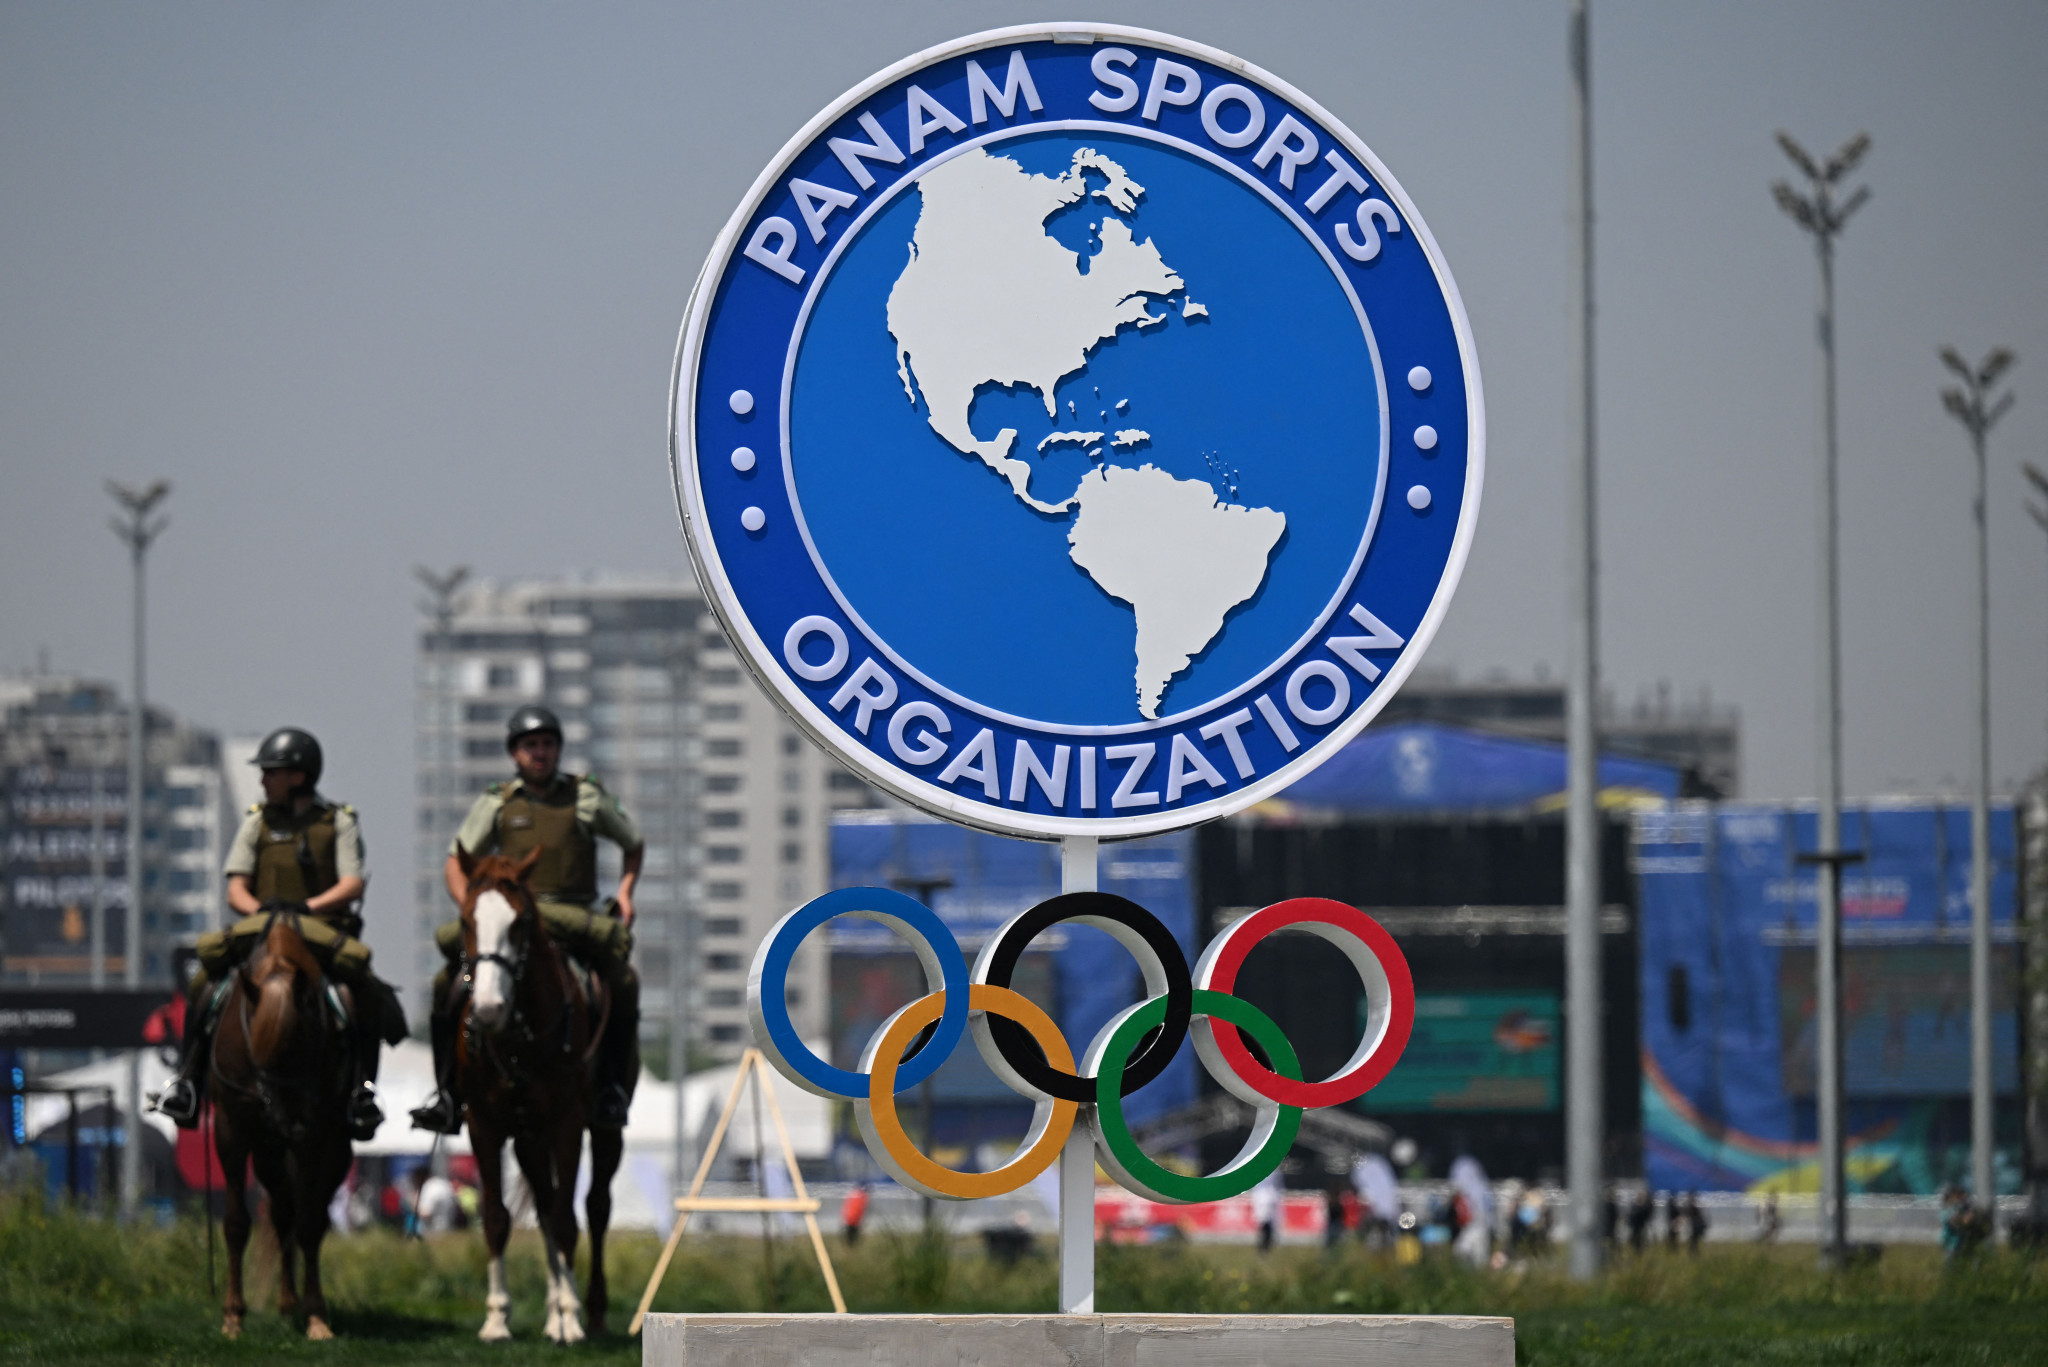 Mounted officers are seen next to the Olympic Rings and the Panam Sports logo ©Getty Images